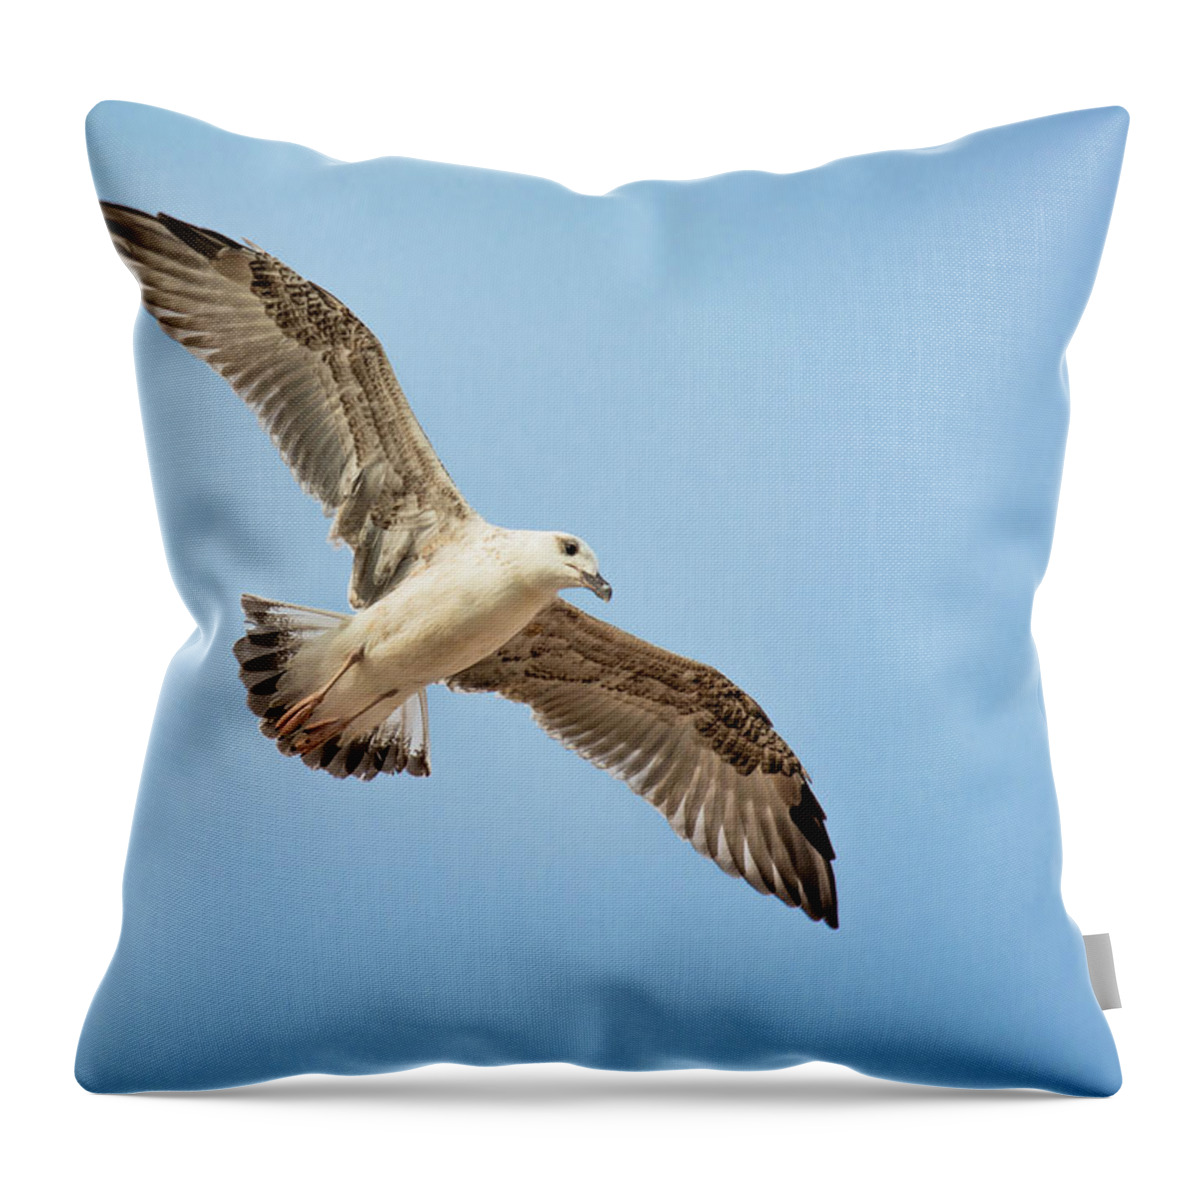 Bird Throw Pillow featuring the photograph Seagull with Widespread Wings by Andreas Berthold